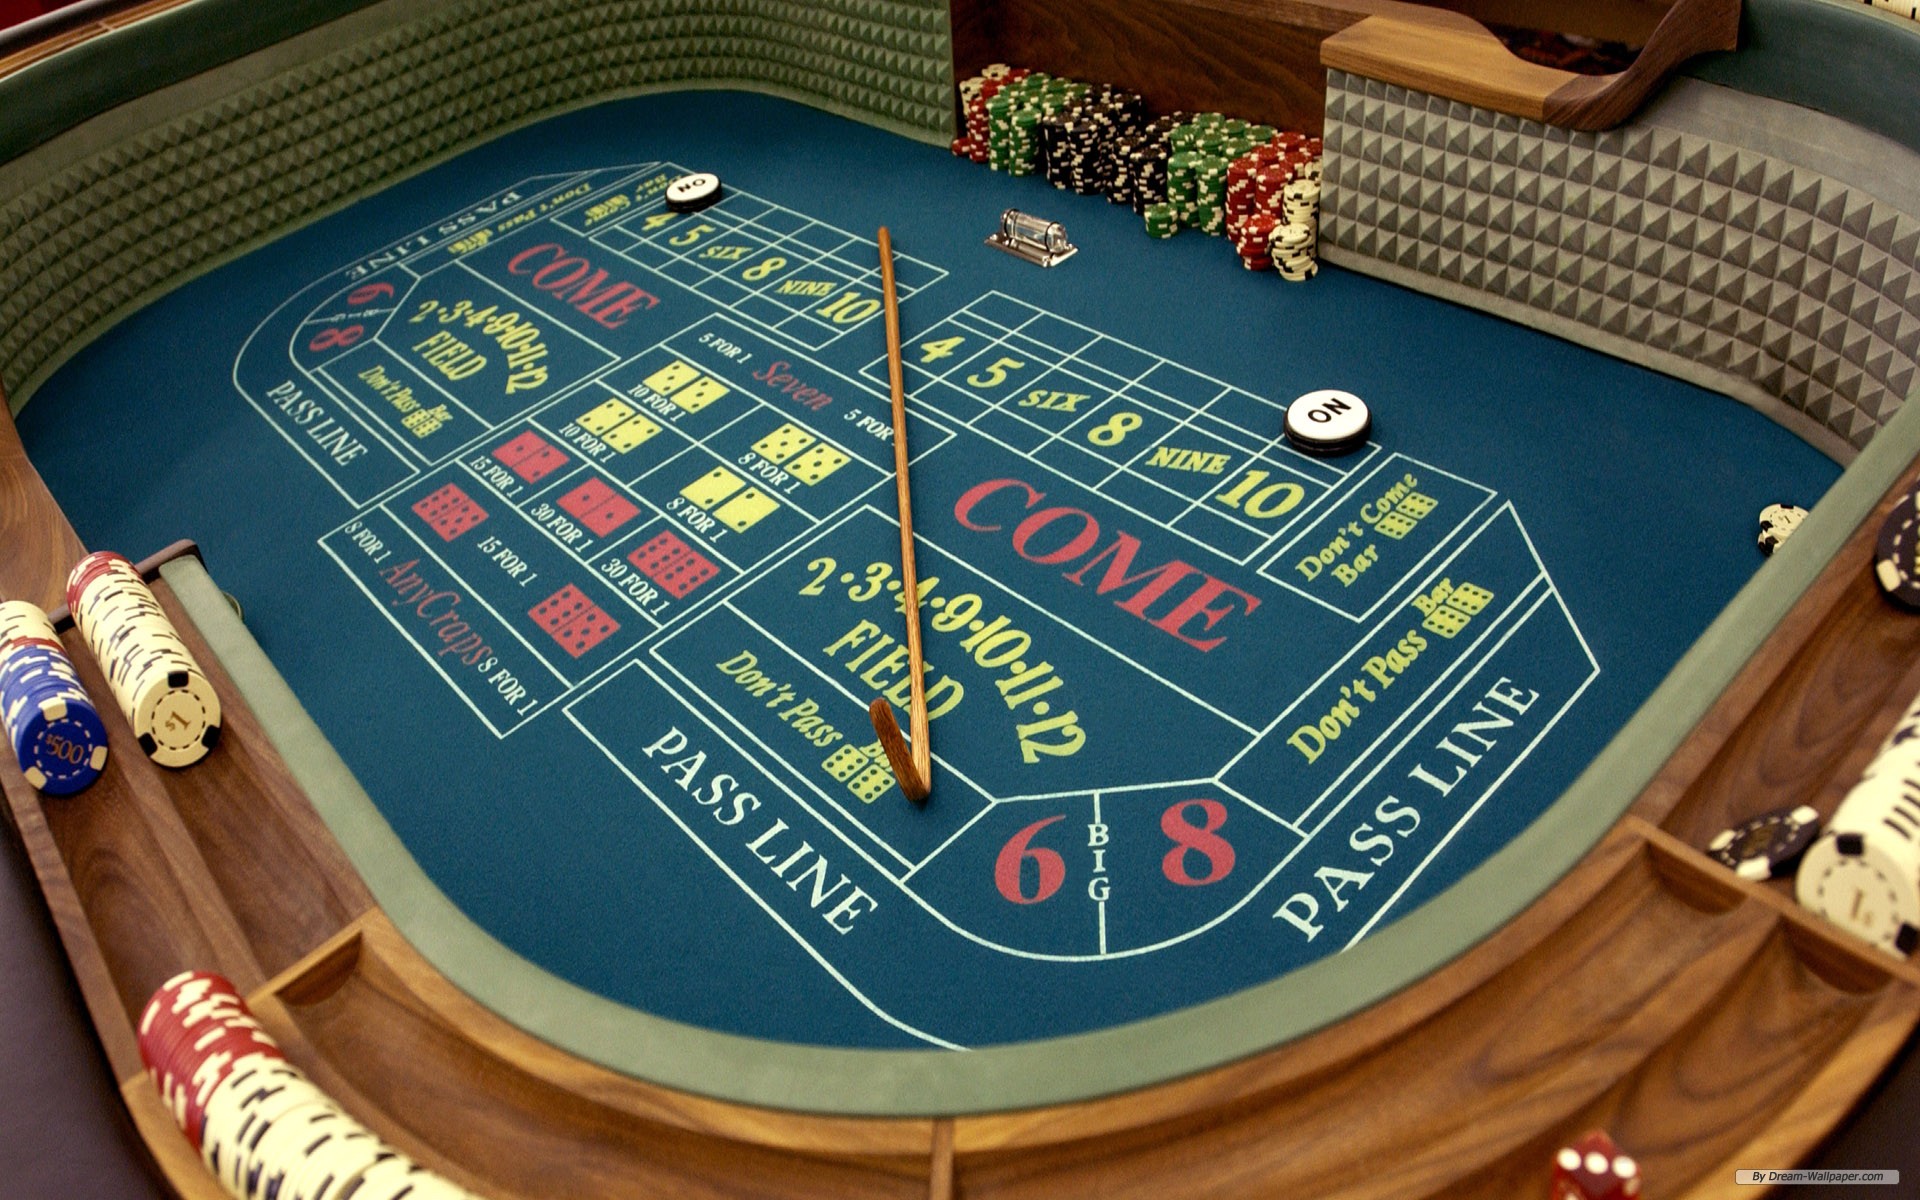 Evolving Casino Marketing Campaigns Personalization and Targeted Messaging